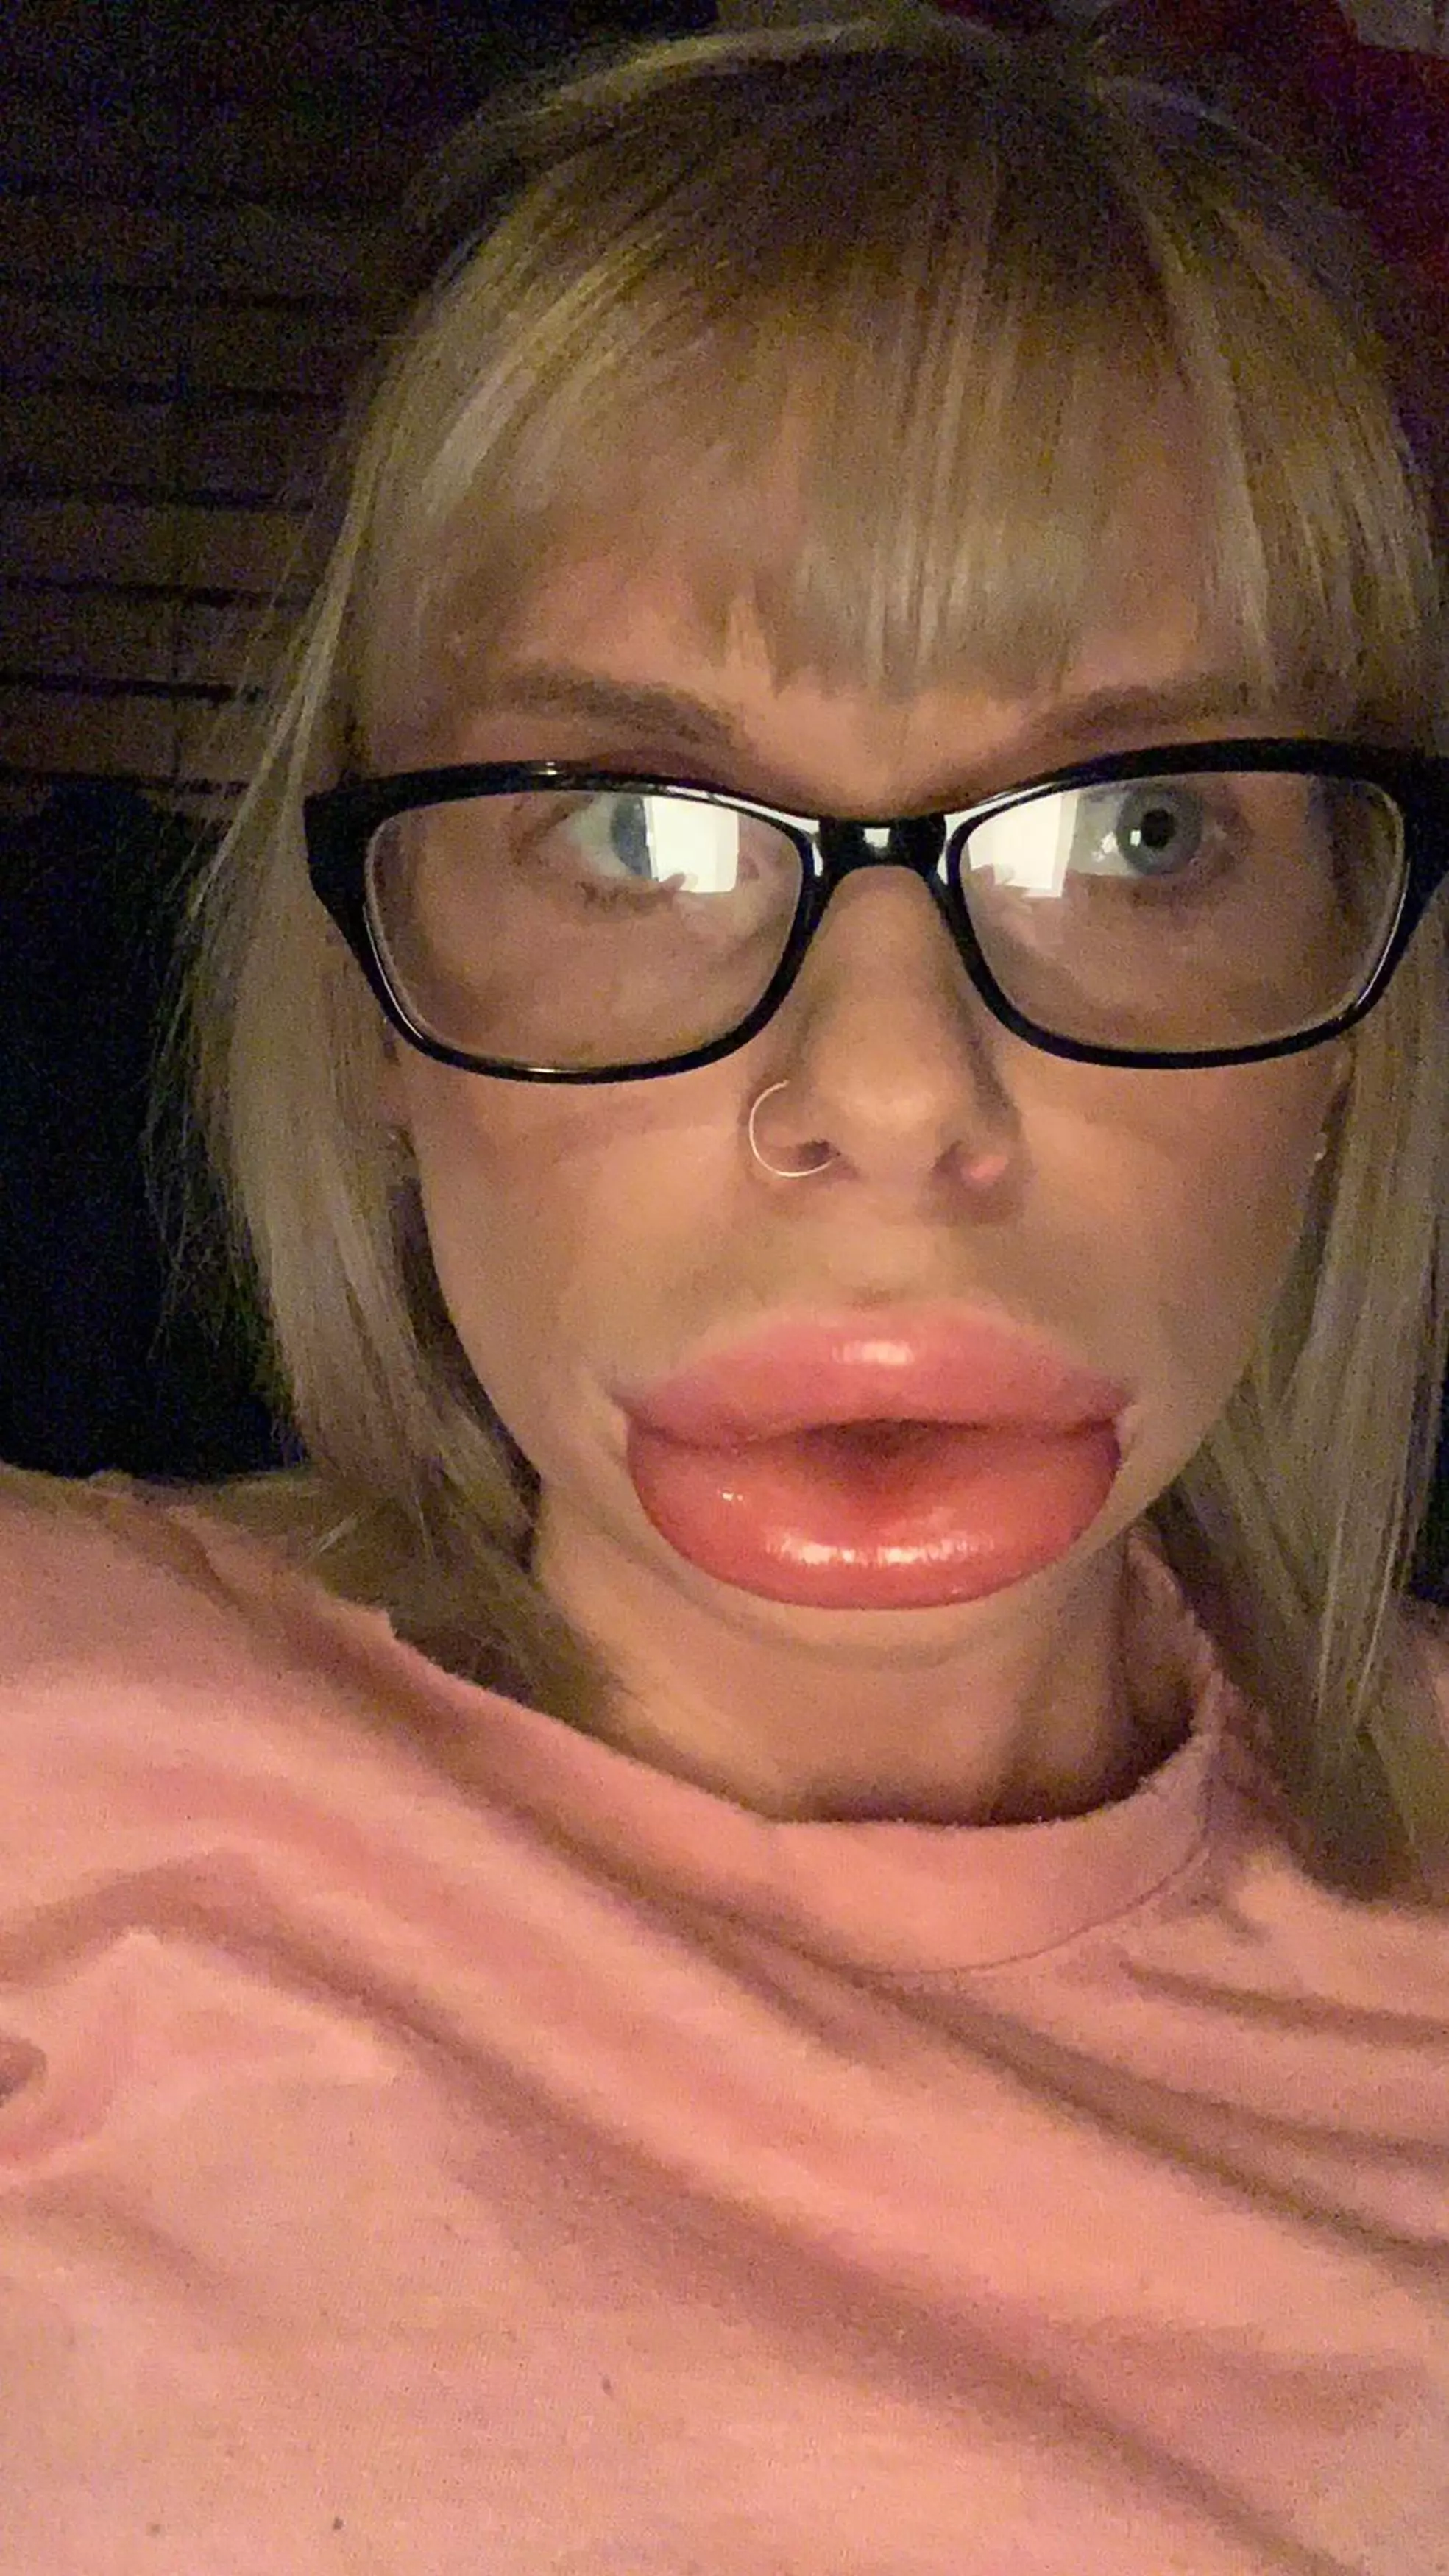 Christina when her lips swelled 'out of control'.